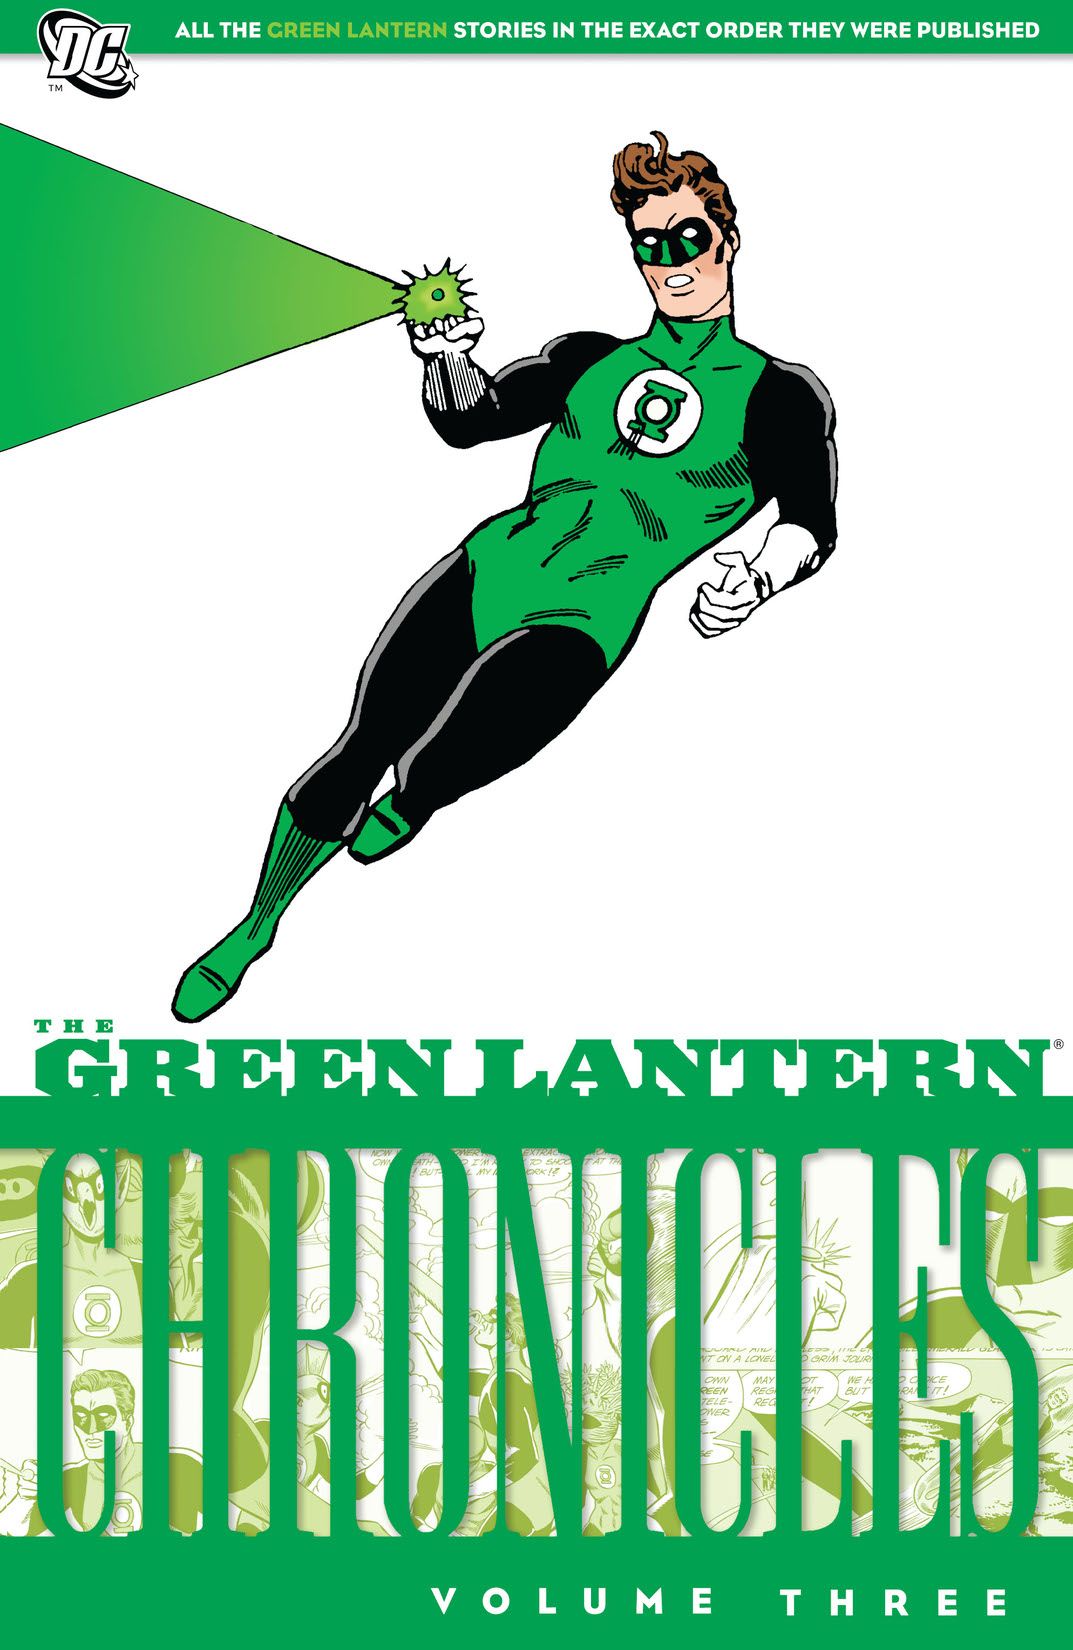 The Green Lantern Chronicles Vol. 3 preview images